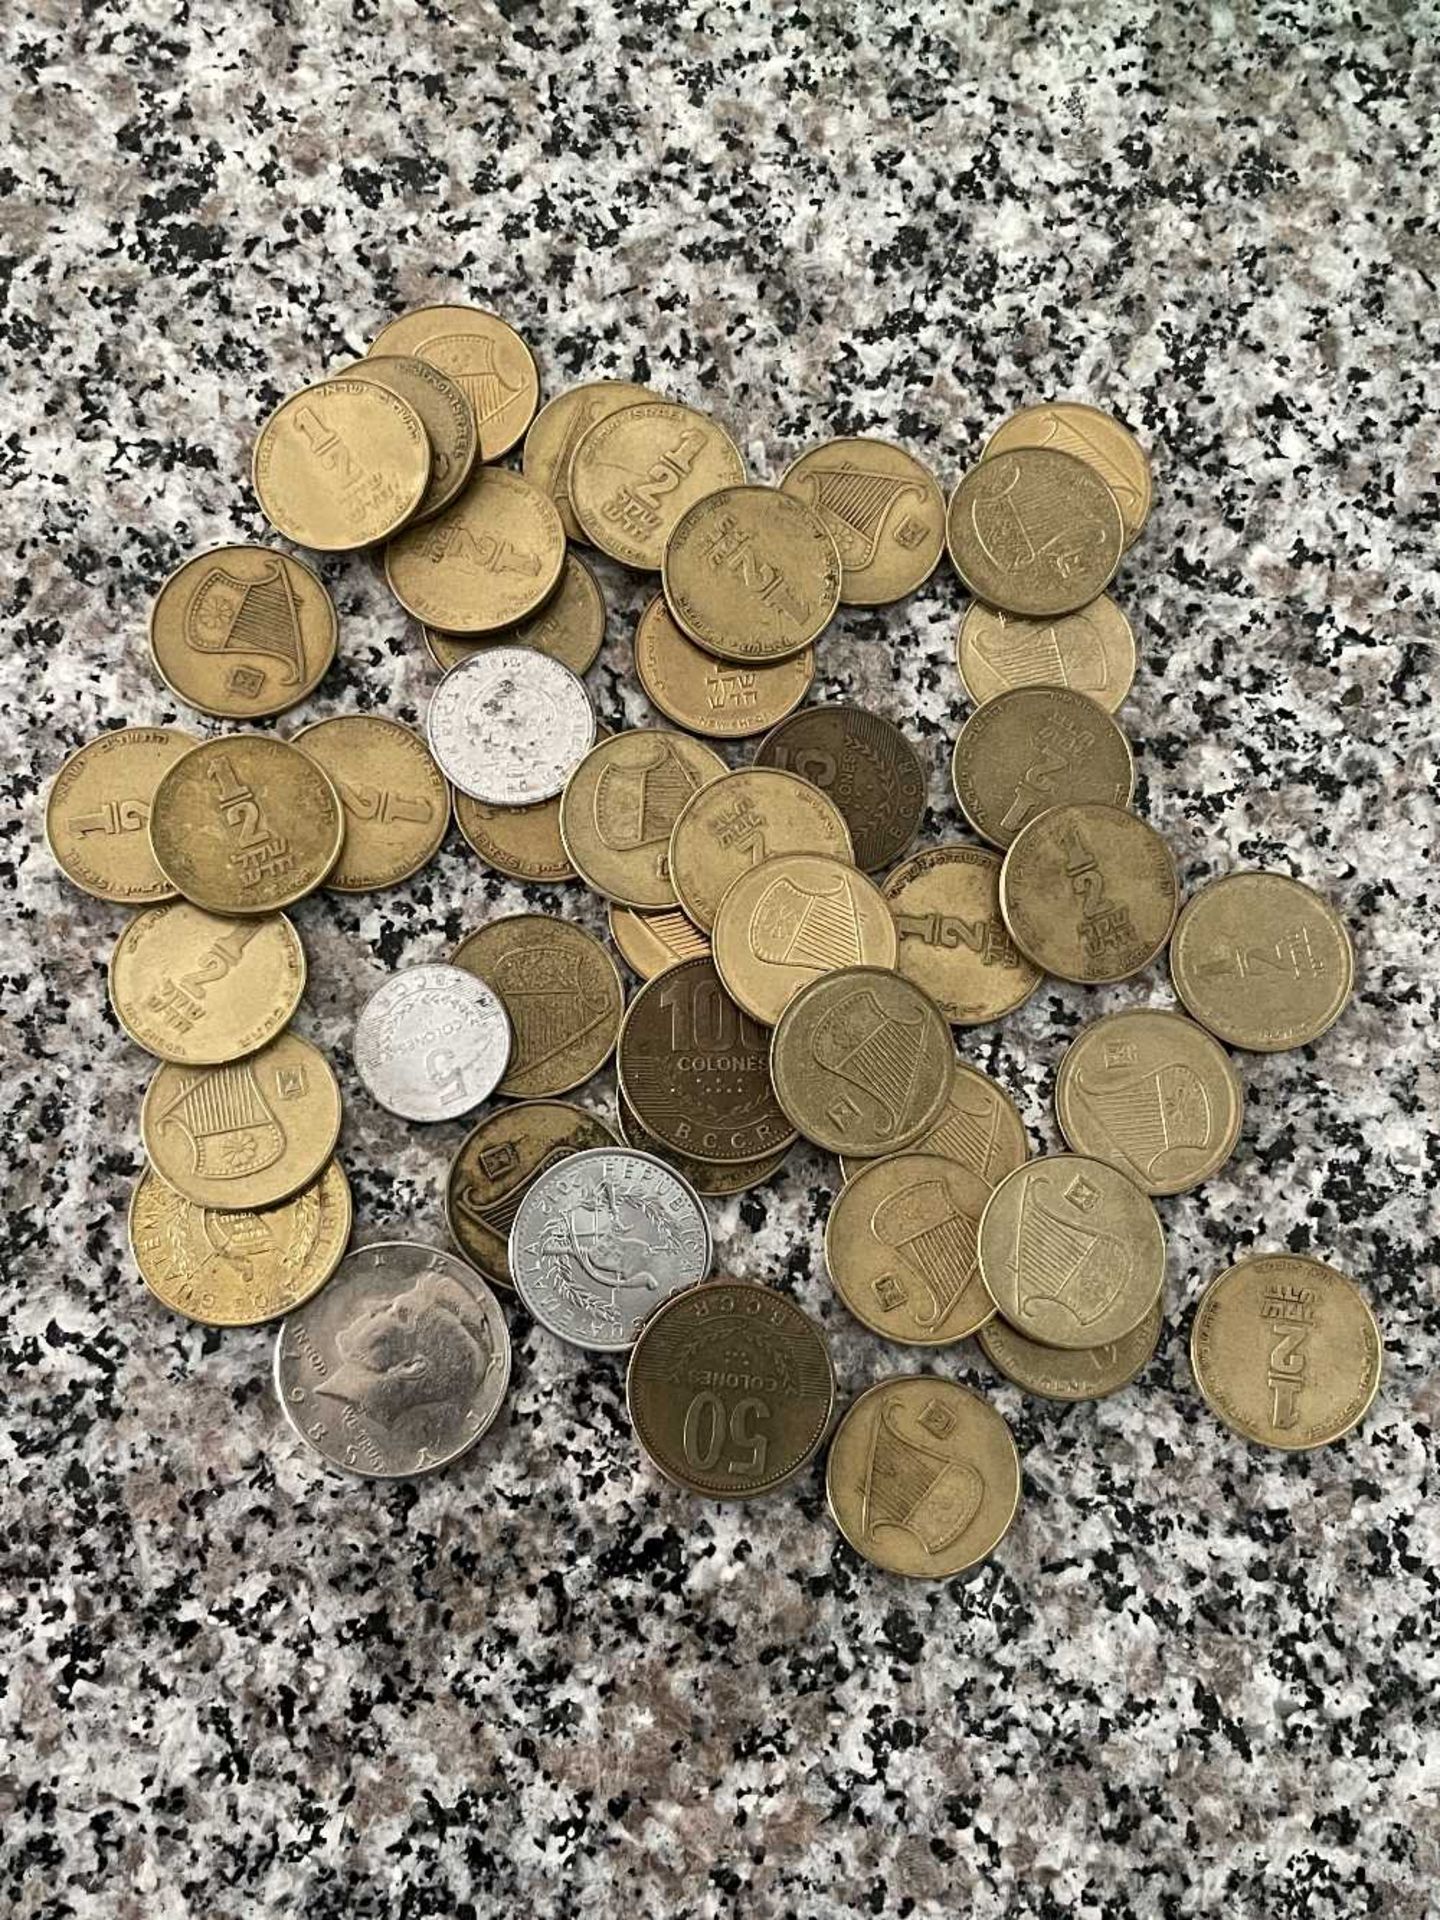 Collection of Coins from Israel, USA and Other International